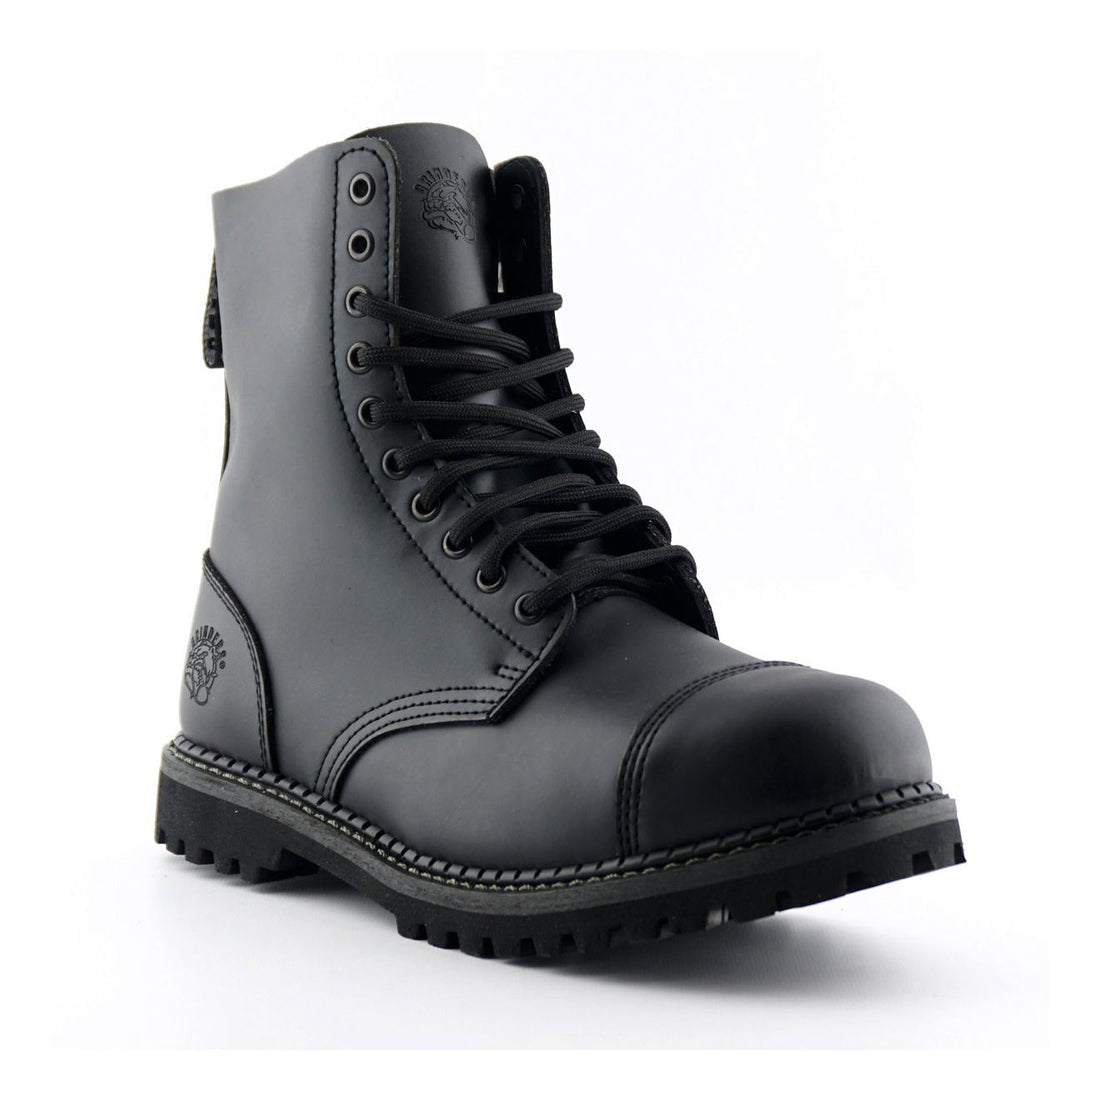 Grinders Stag CS Black Unisex Safety Steel Toe Cap Military Punk Boots - Upperclass Fashions 